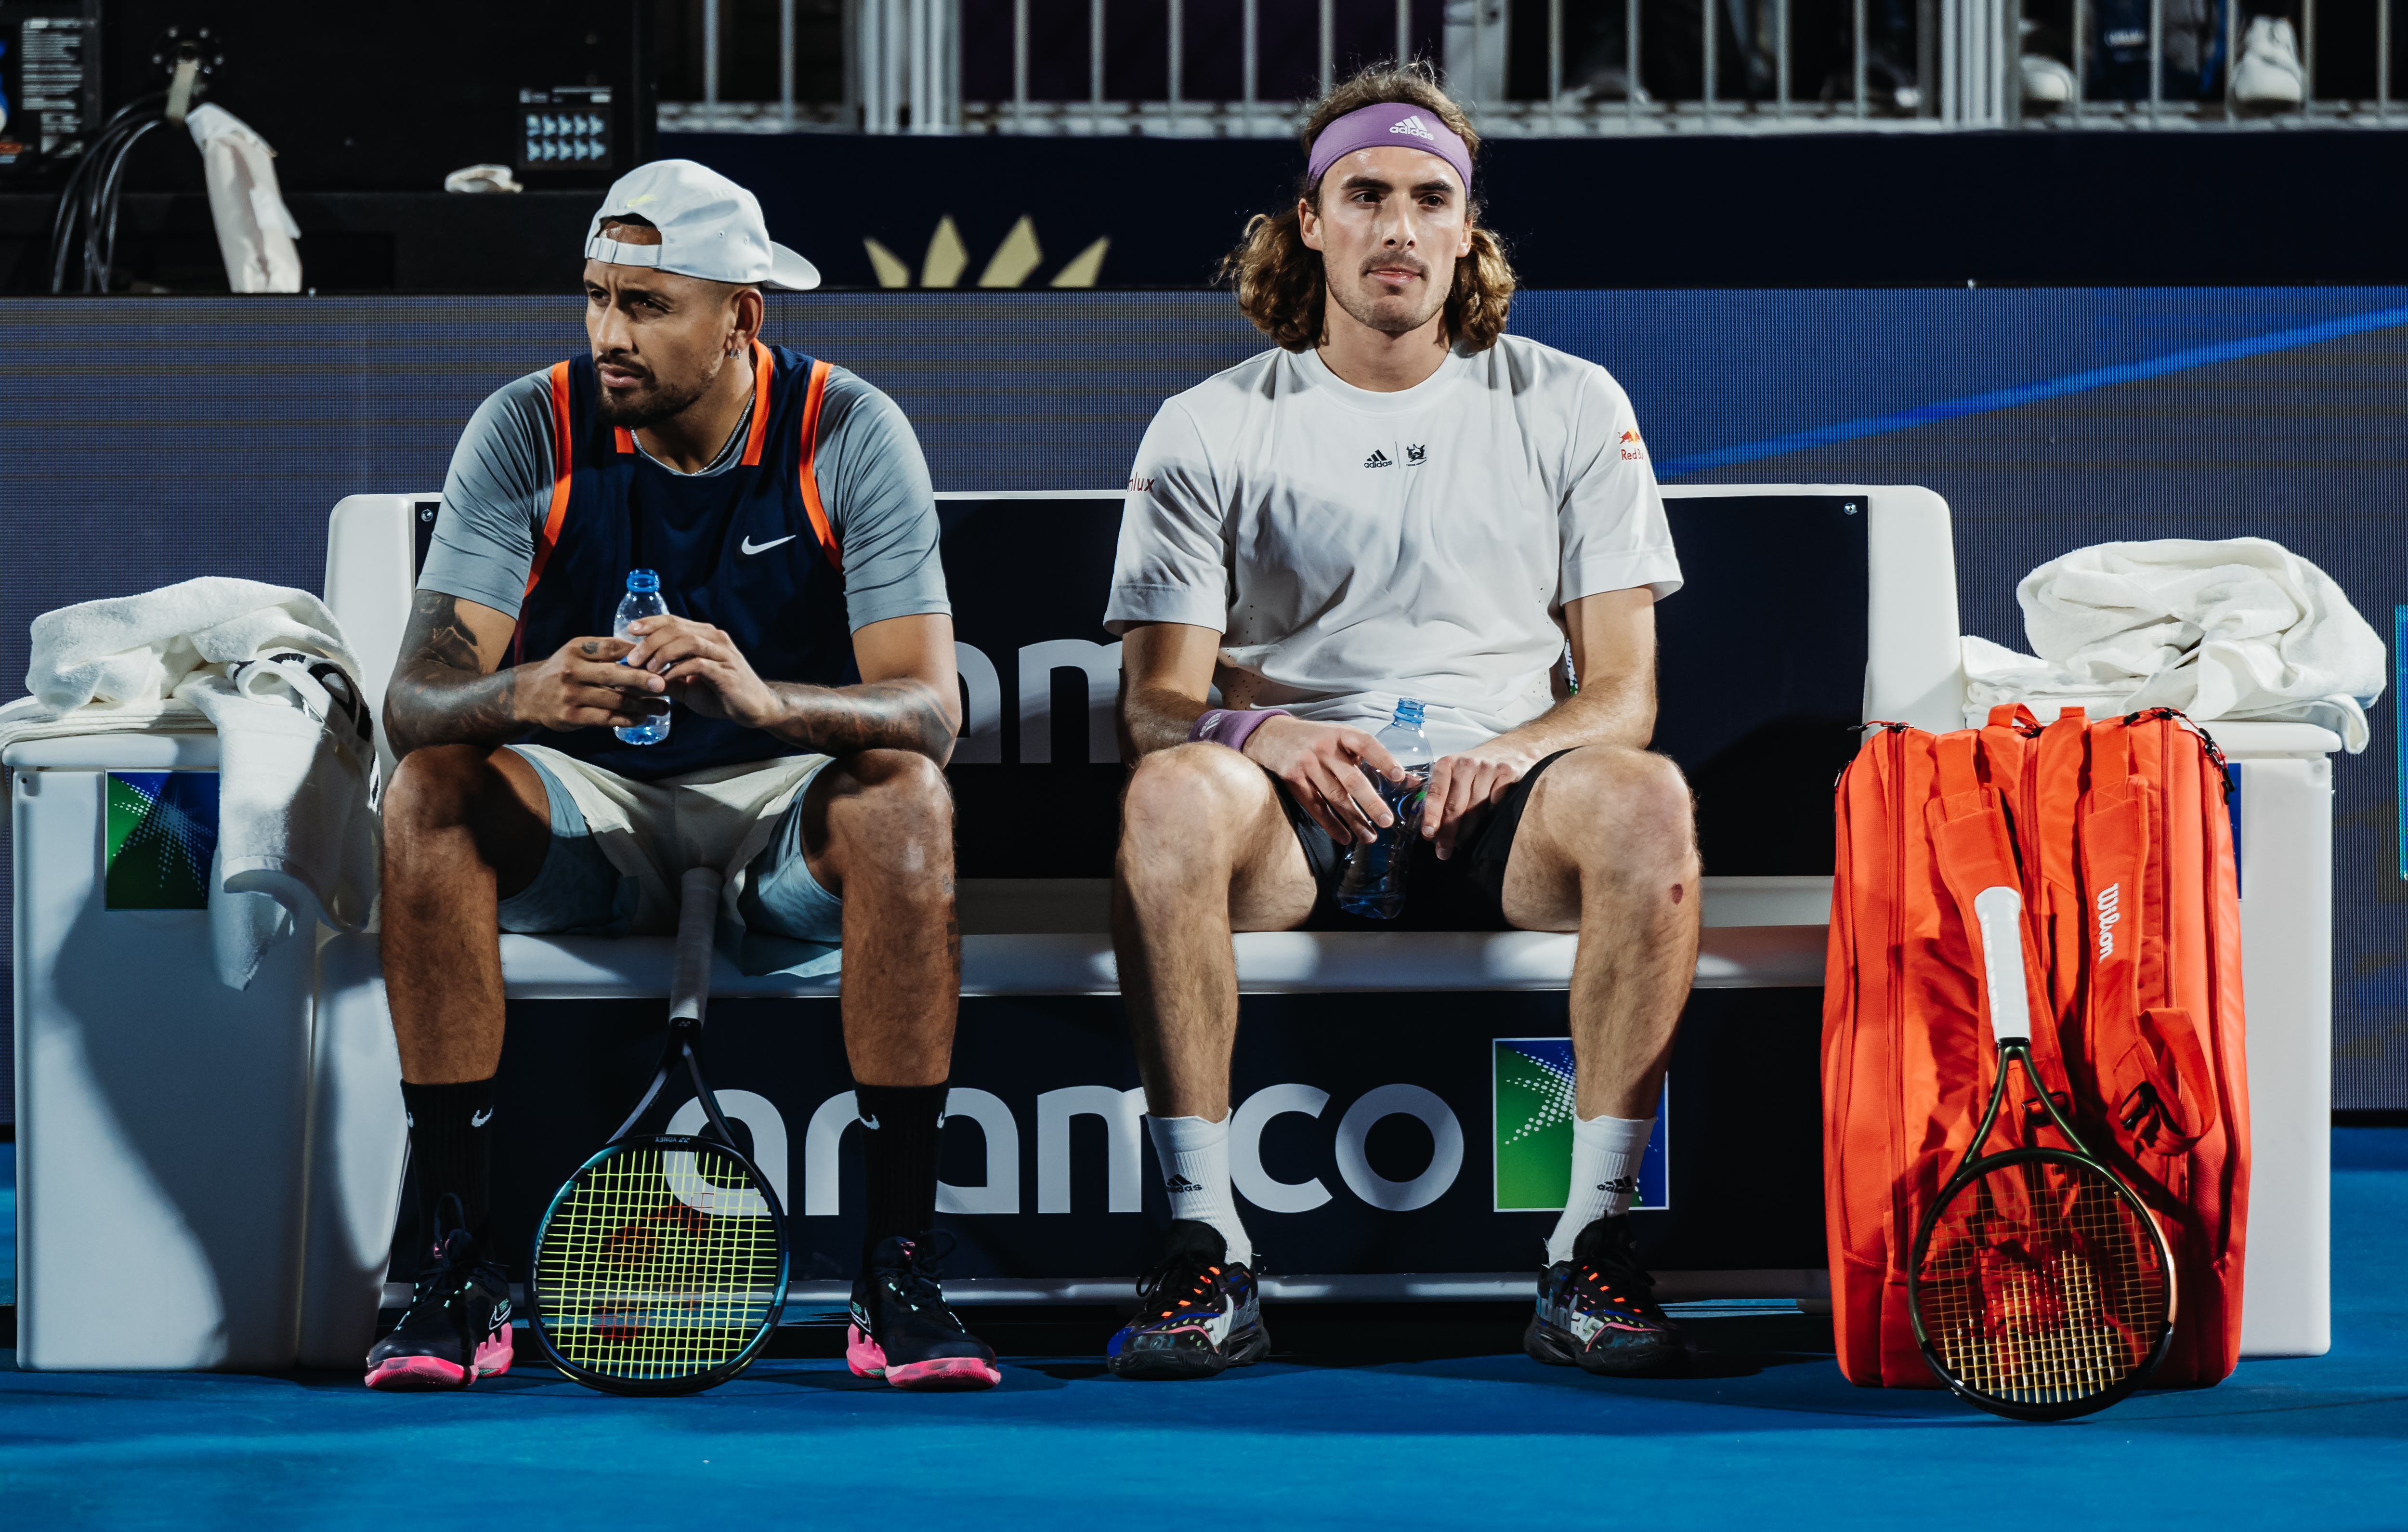 Top 5 ATP Players of 2022 Nick Kyrgios, Stefanos Tsitsipas share honorable mention status